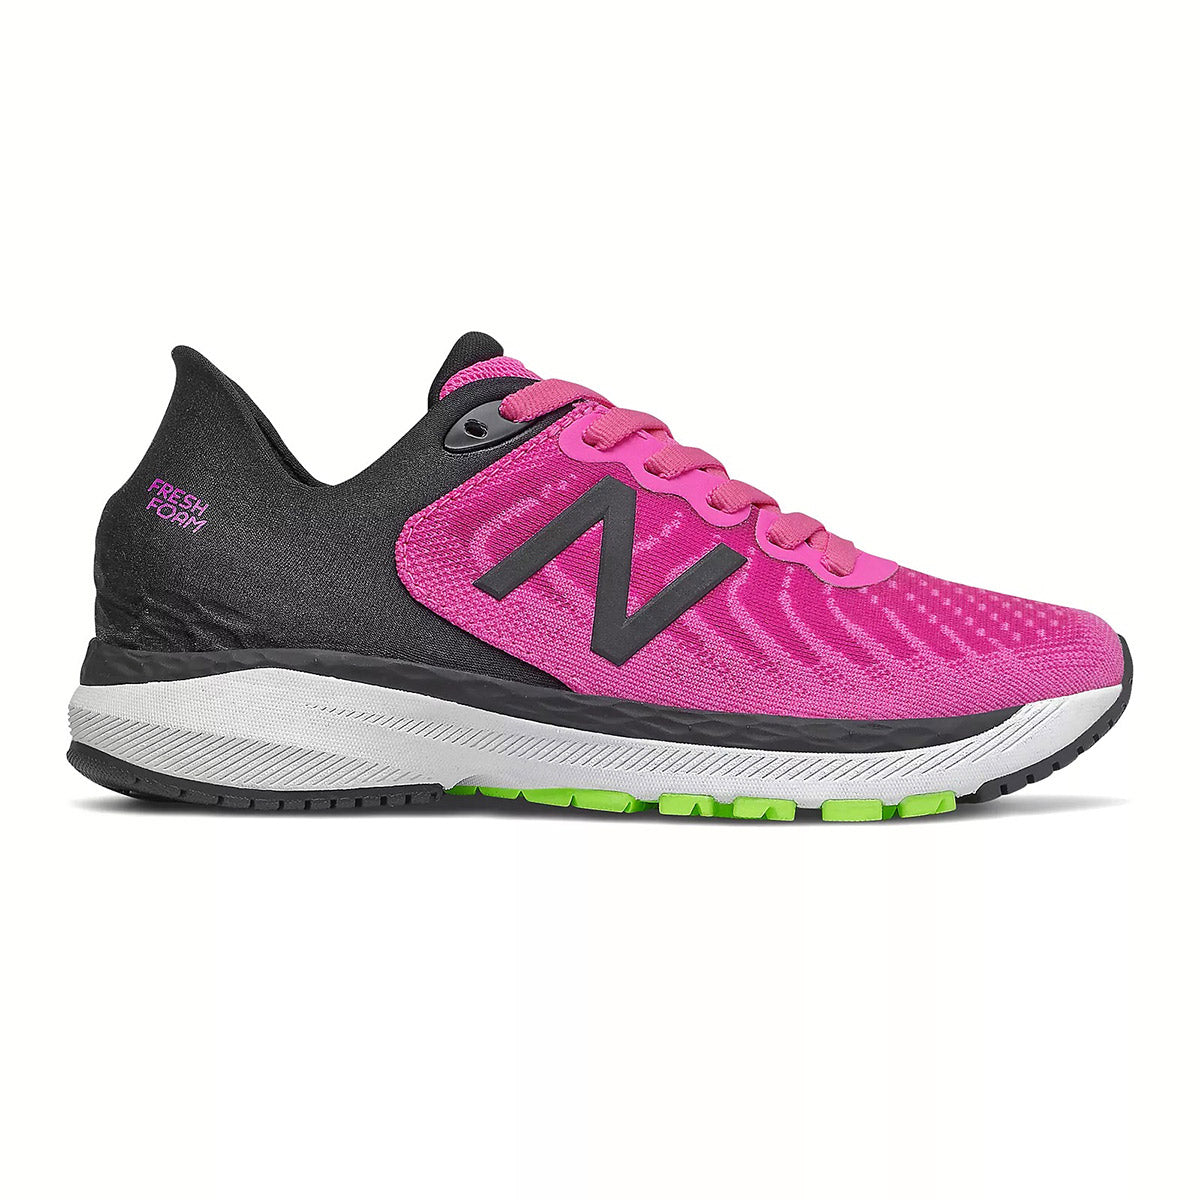 A pink and black New Balance Fresh Foam 860V11 Fusion/Black running shoe with white and lime accents, featuring a Fresh Foam midsole.